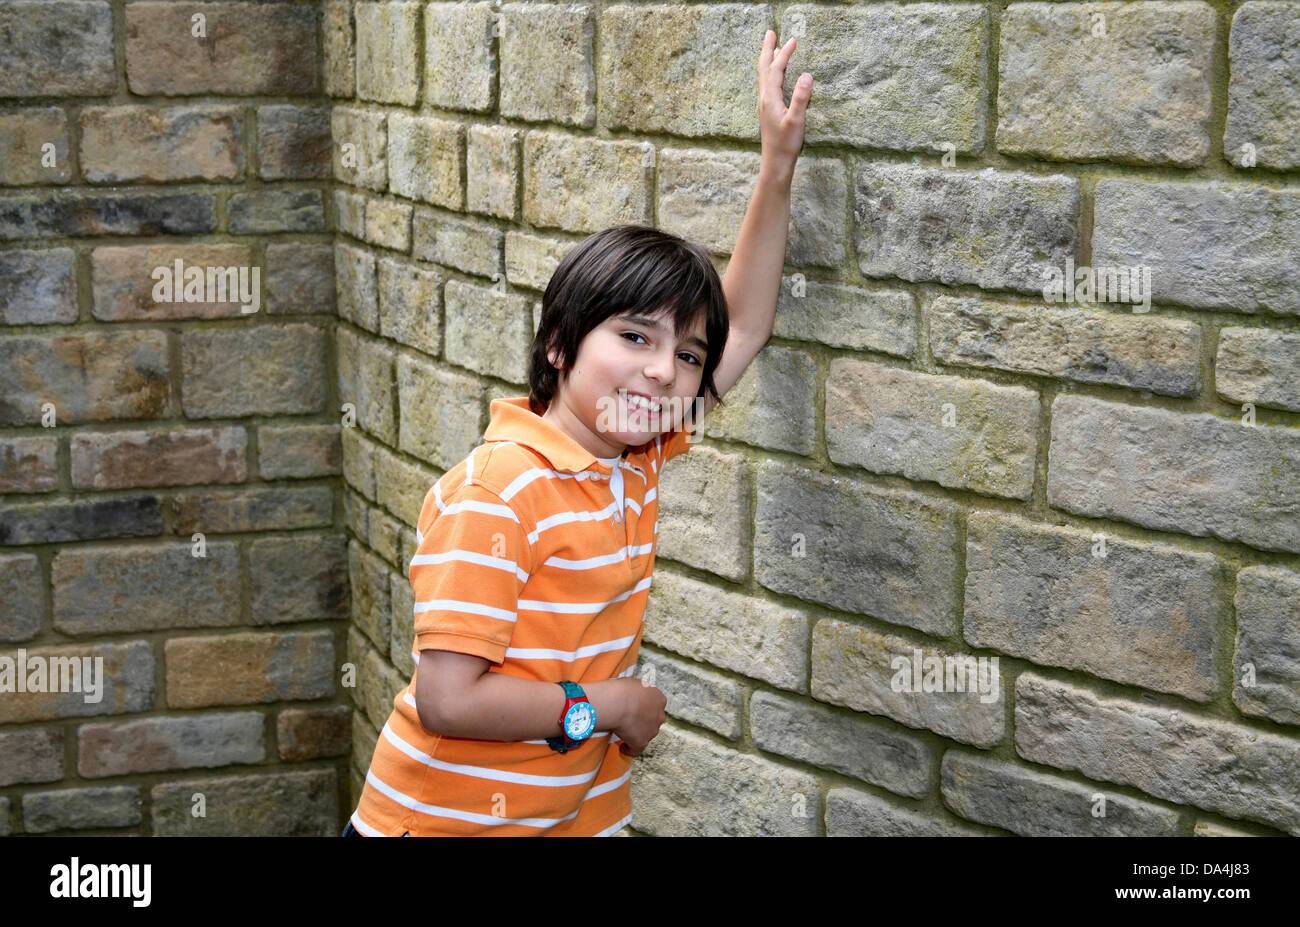 Portrait of smiling brunette boy leaning on stone wall with arms raised Banque D'Images